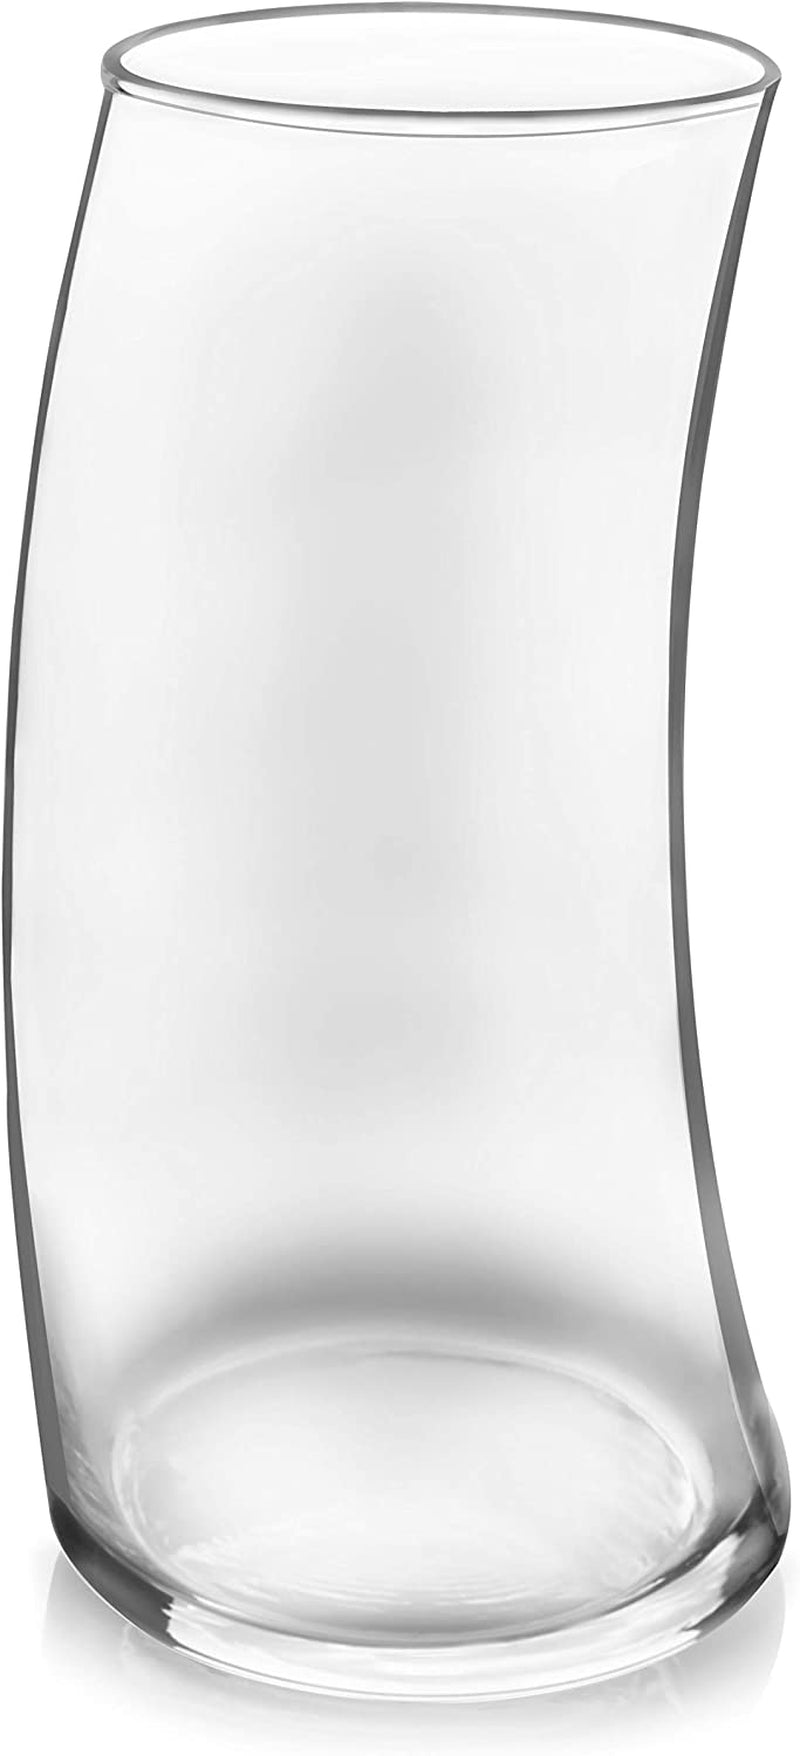 Libbey Swerve 16-Piece Tumbler and Rocks Glass Set Home & Garden > Kitchen & Dining > Tableware > Drinkware Libbey   